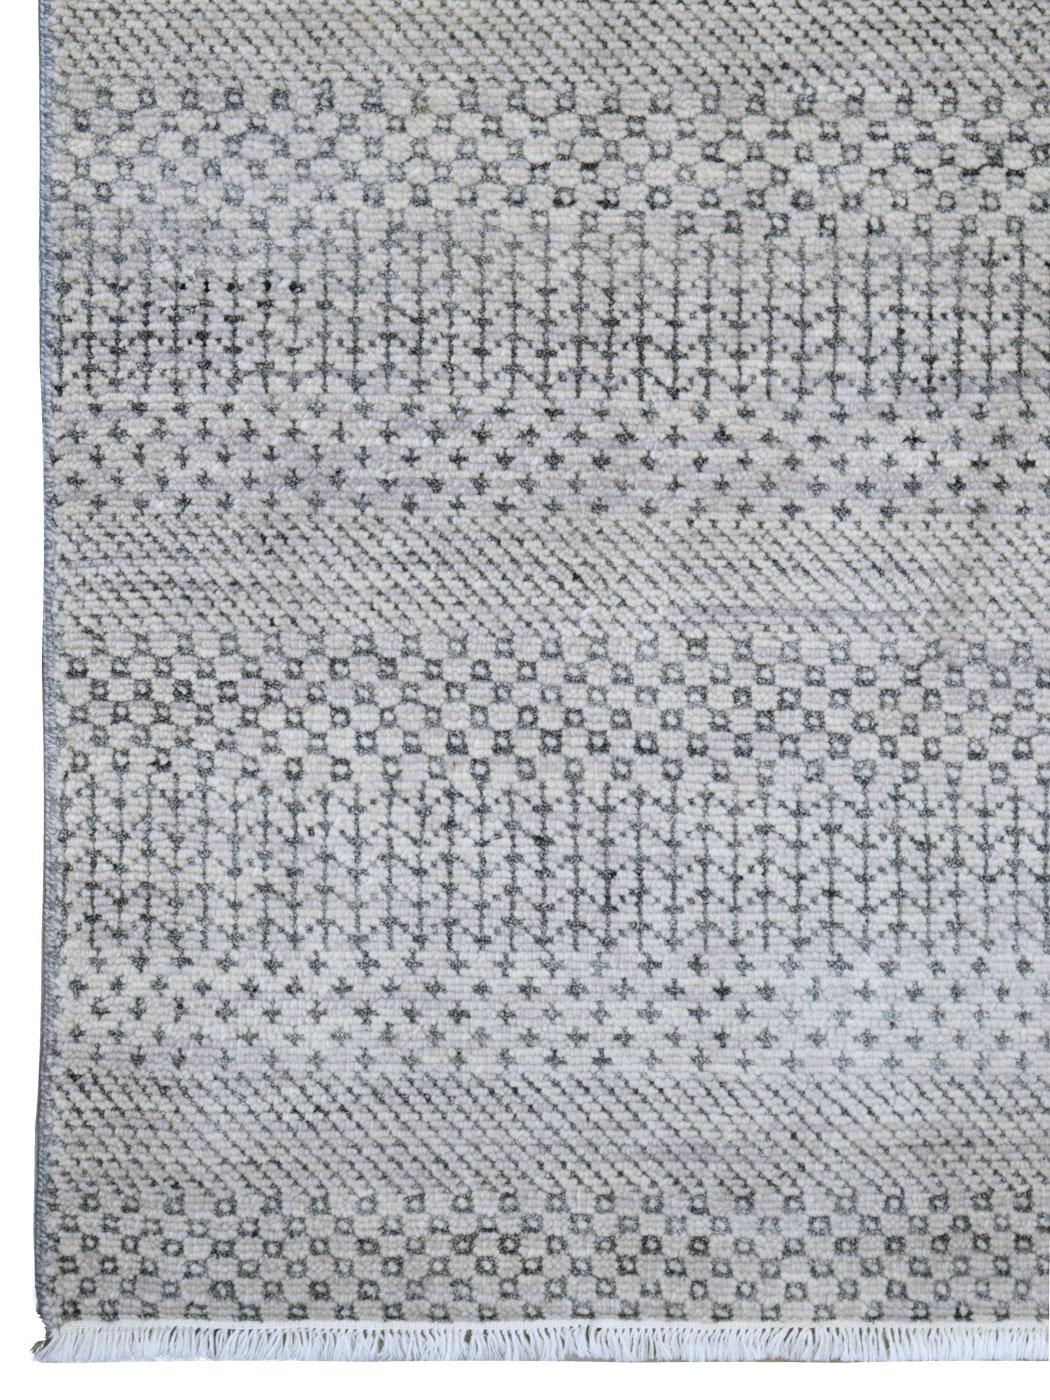 Indian Gray on Gray Modern Hand-Knotted Wool Carpet, 6' x 9' For Sale